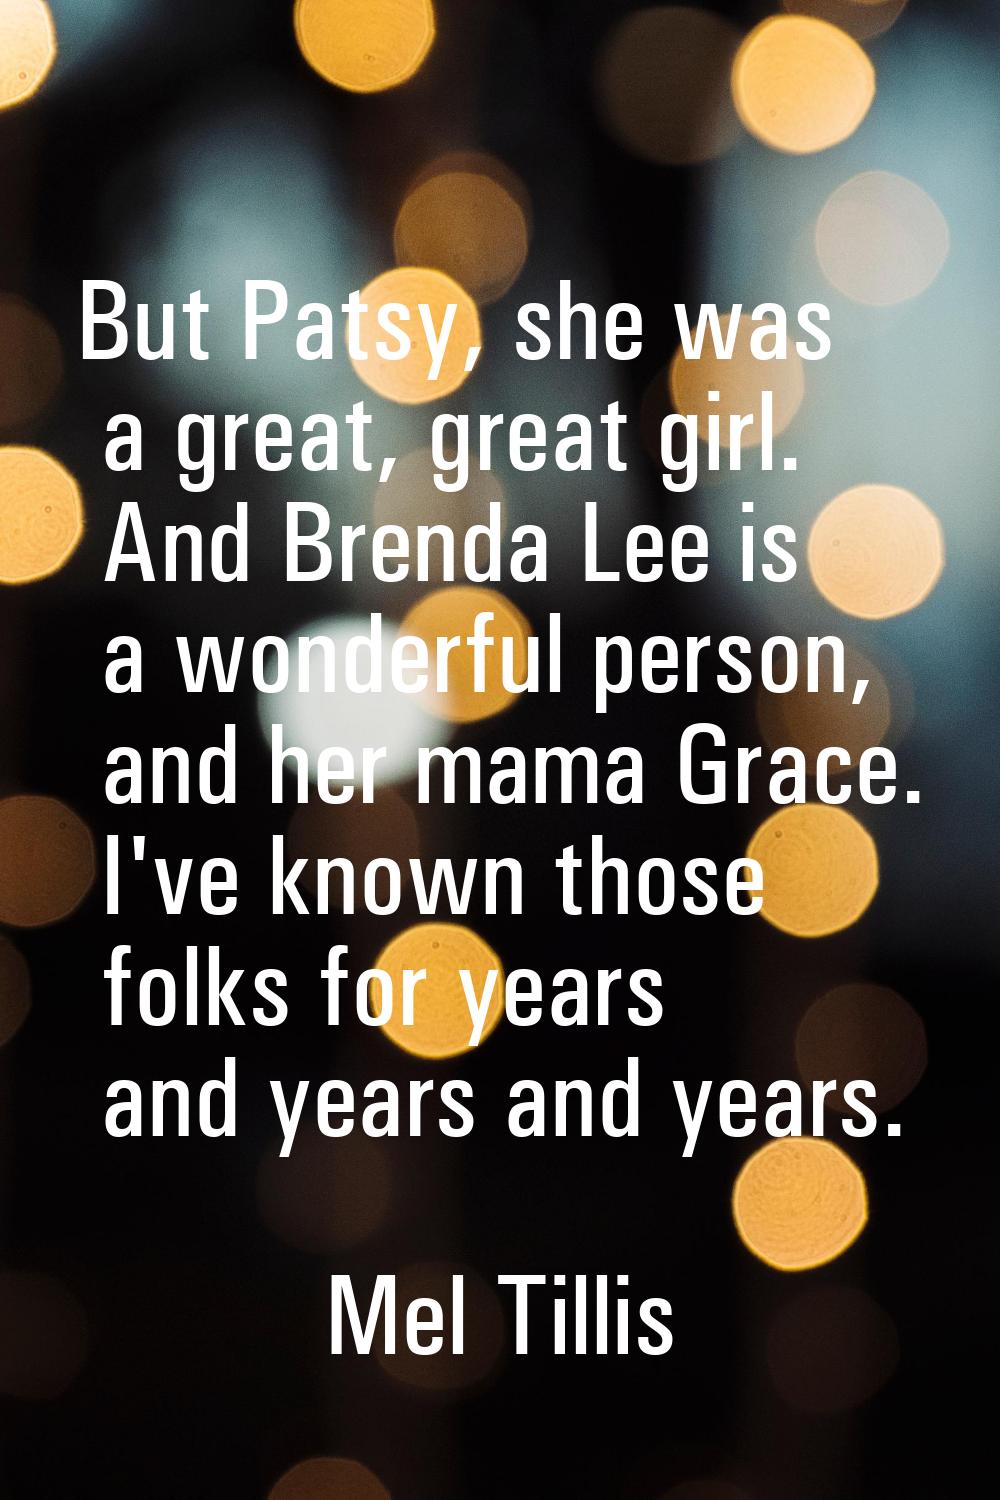 But Patsy, she was a great, great girl. And Brenda Lee is a wonderful person, and her mama Grace. I